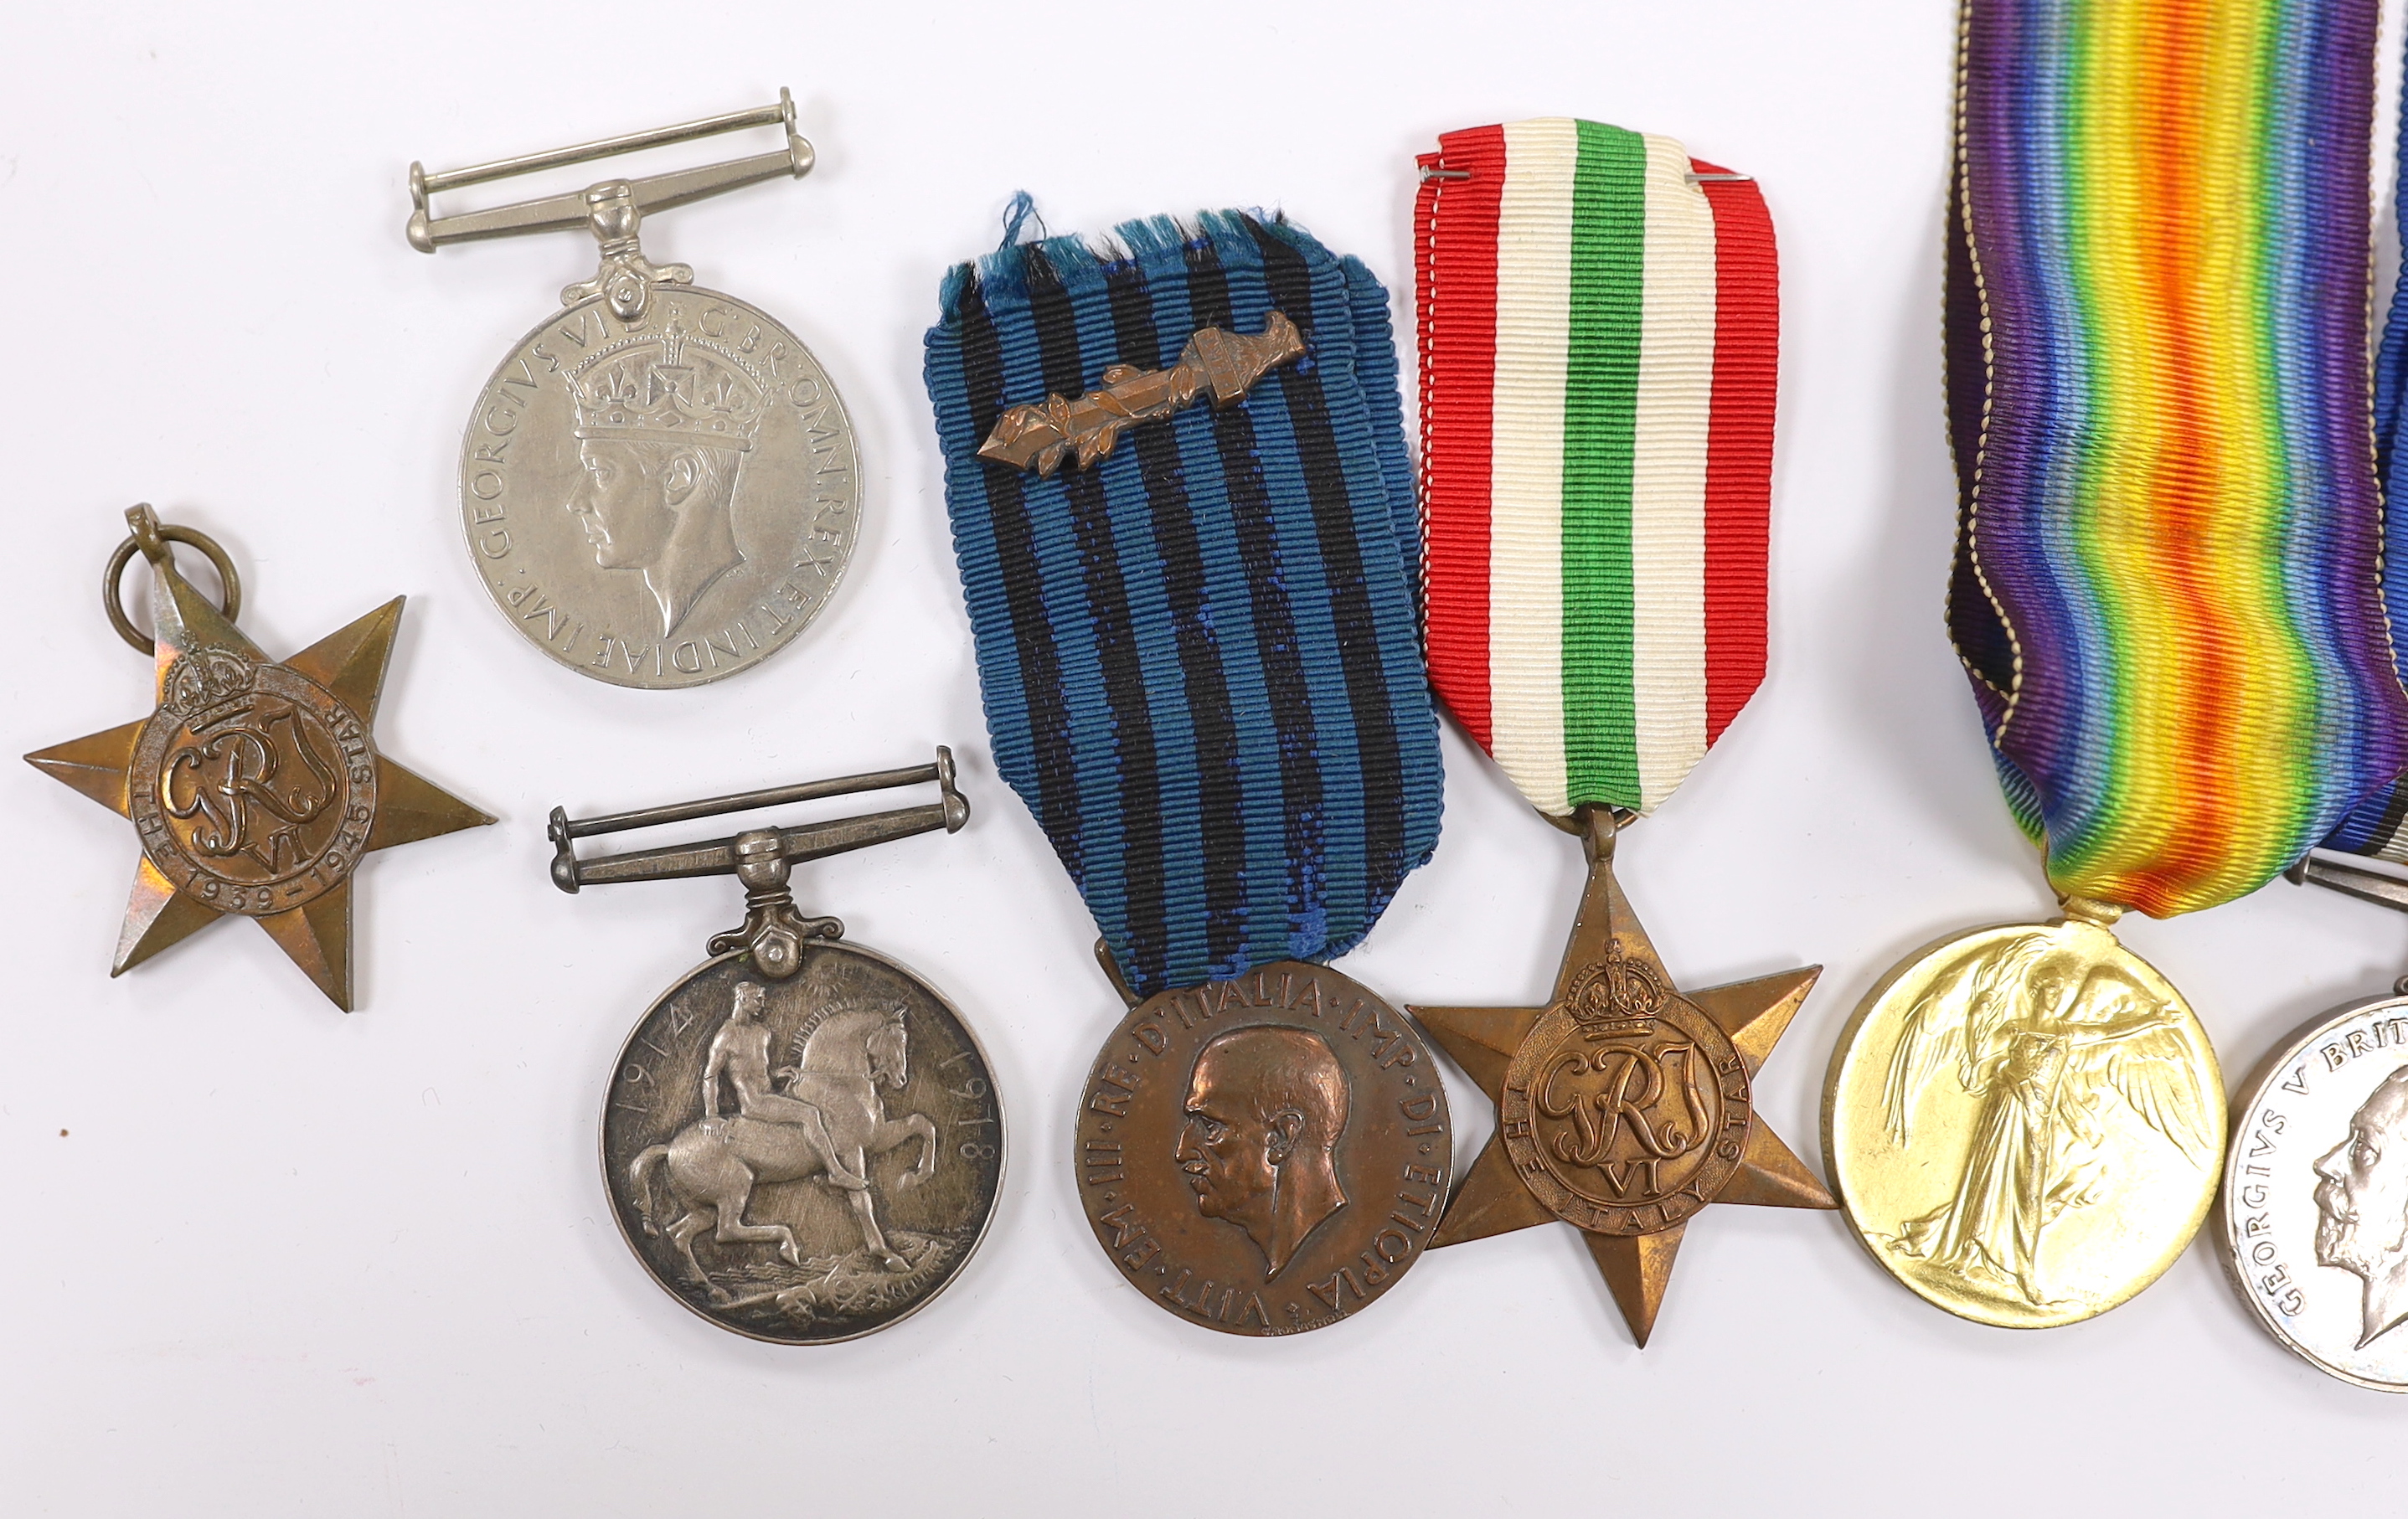 Ten medals; two First World War pairs of the Victory medal and the British War medal to Pte. F.J. Pulham 24 London Reg. and Pte. H. Cannell M.G.C., three WWII medals; The Italy Star, The 1939-1945 Star and a 1939-1945 Wa